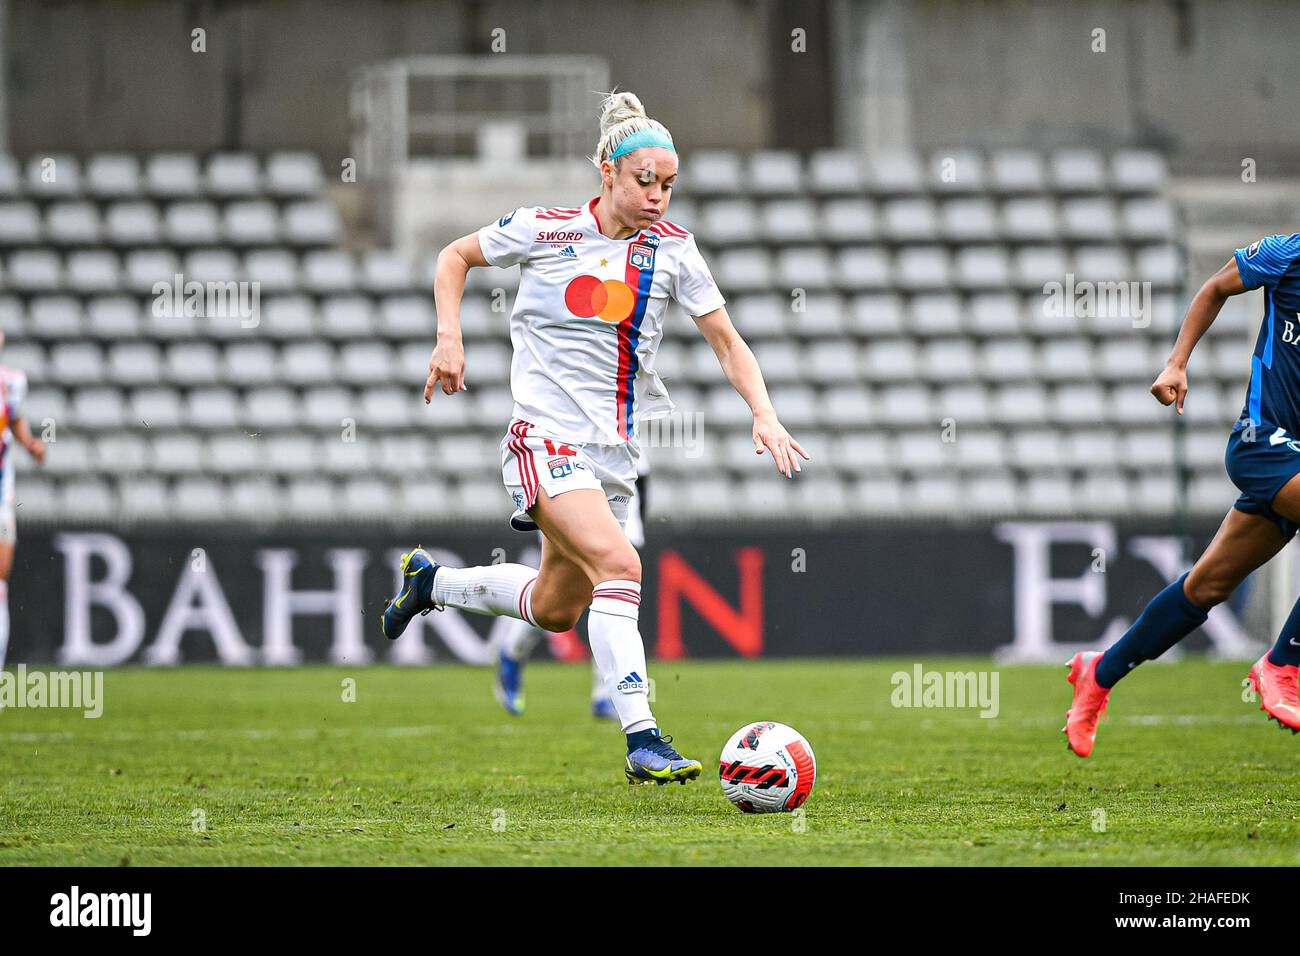 Paris, France. 12th Dec, 2021. Ellie Carpenter of Olympique Lyonnais during the Women's French championship, D1 Arkema football match between Paris FC and Olympique Lyonnais (OL) on December 12, 2021 at Charlety Stadium in Paris, France. Photo by Victor Joly/ABACAPRESS.COM Credit: Victor Joly/Alamy Live News Stock Photo